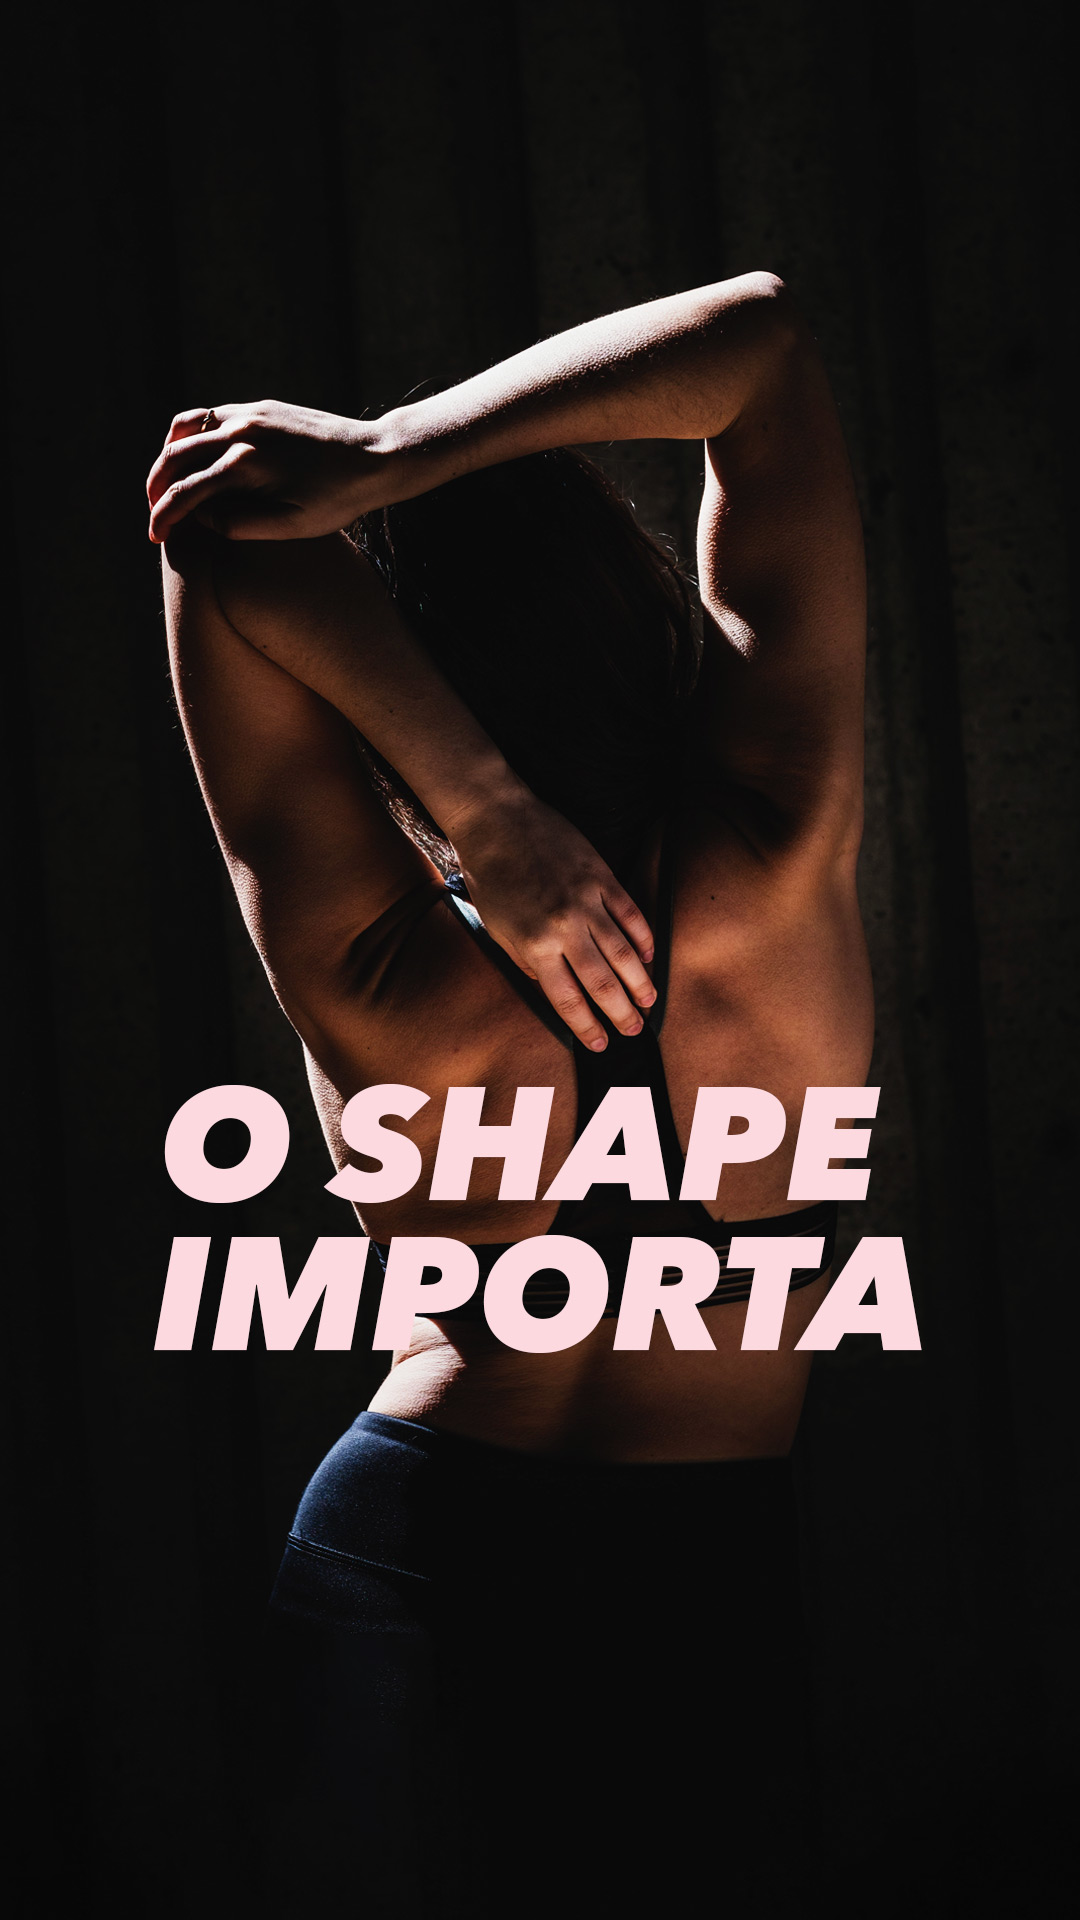 Read more about the article O shape importa.